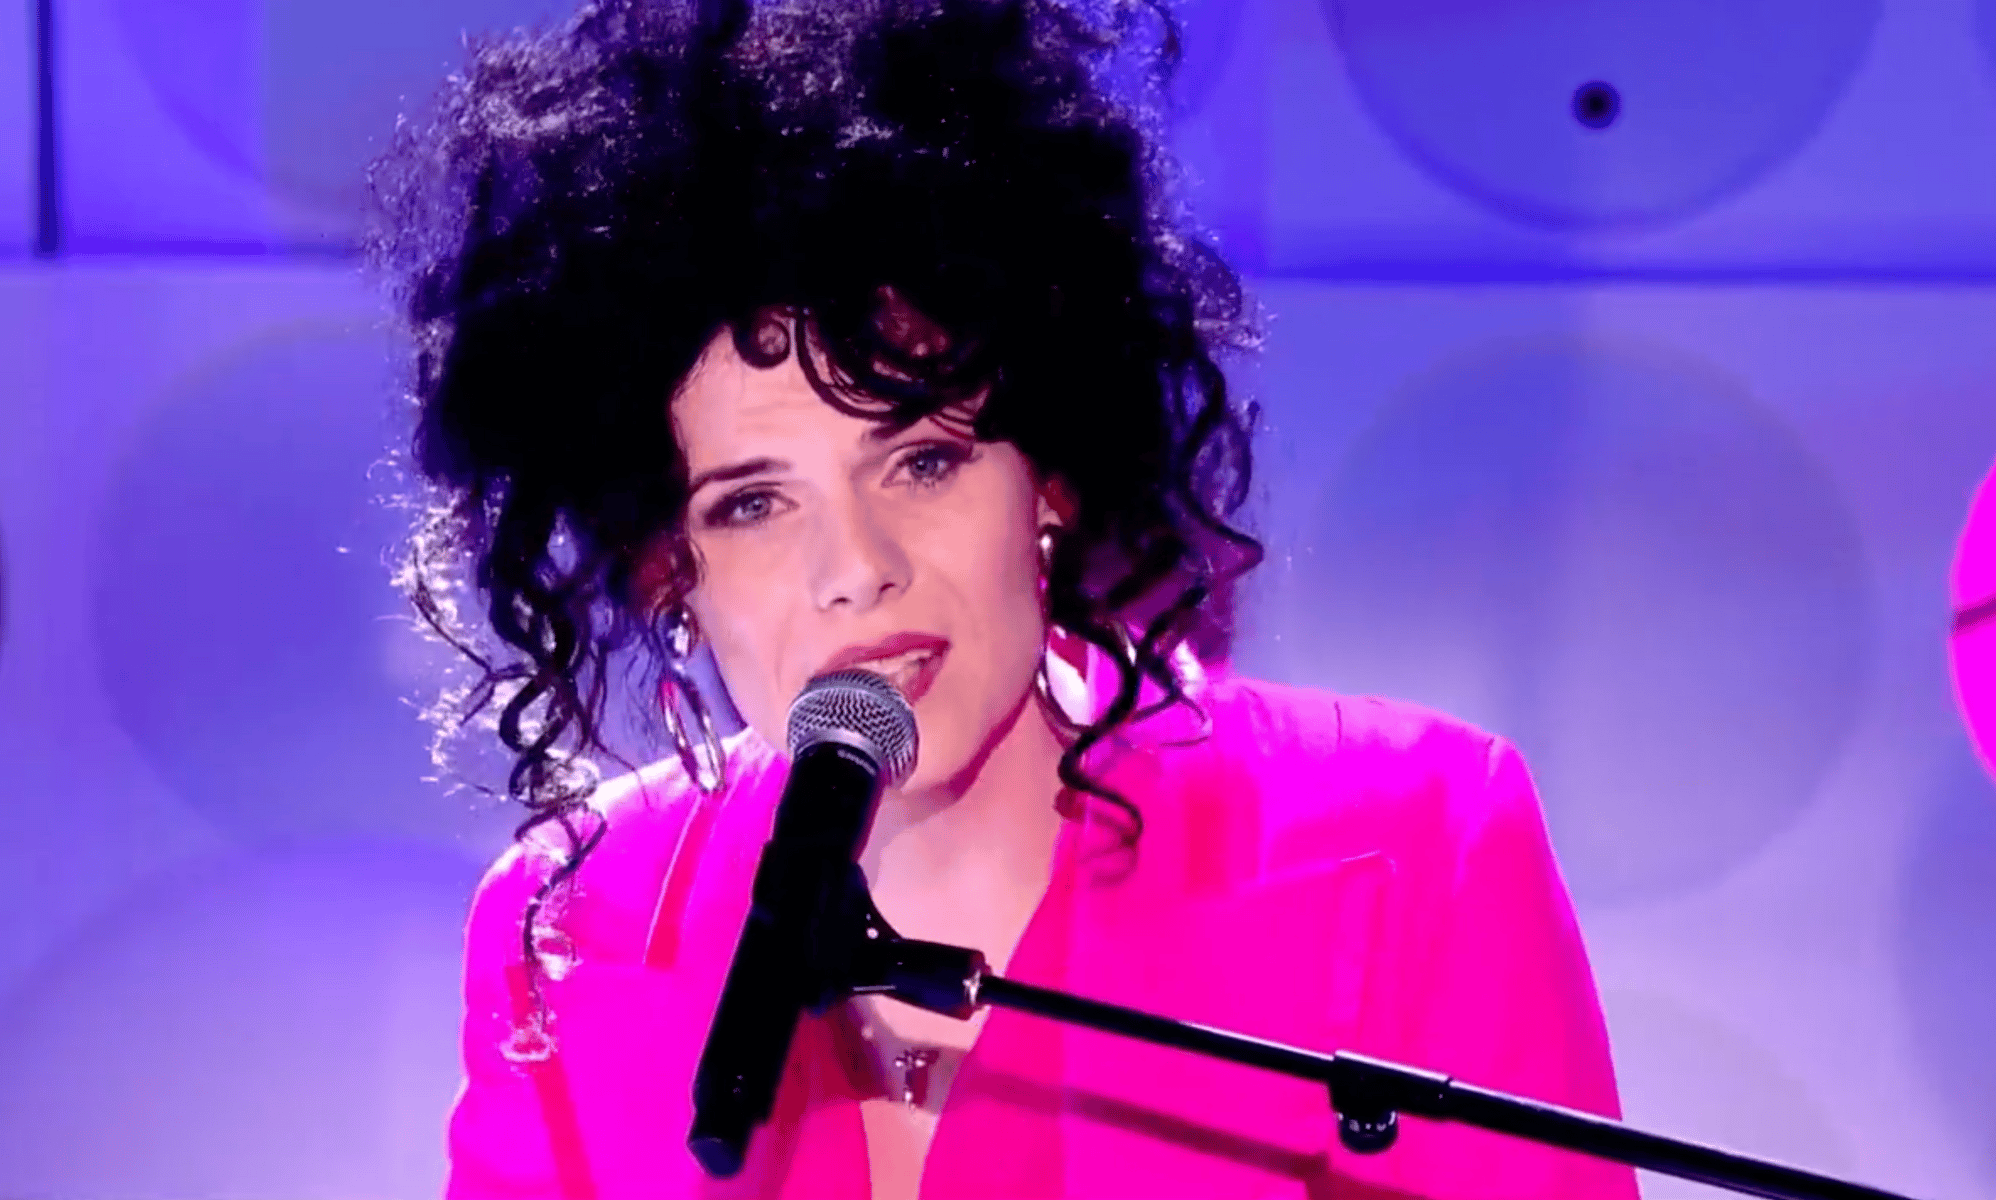 Jordan Gray wears a pink suit as she sings into a microphone during her Channel 4 Friday Night live performance